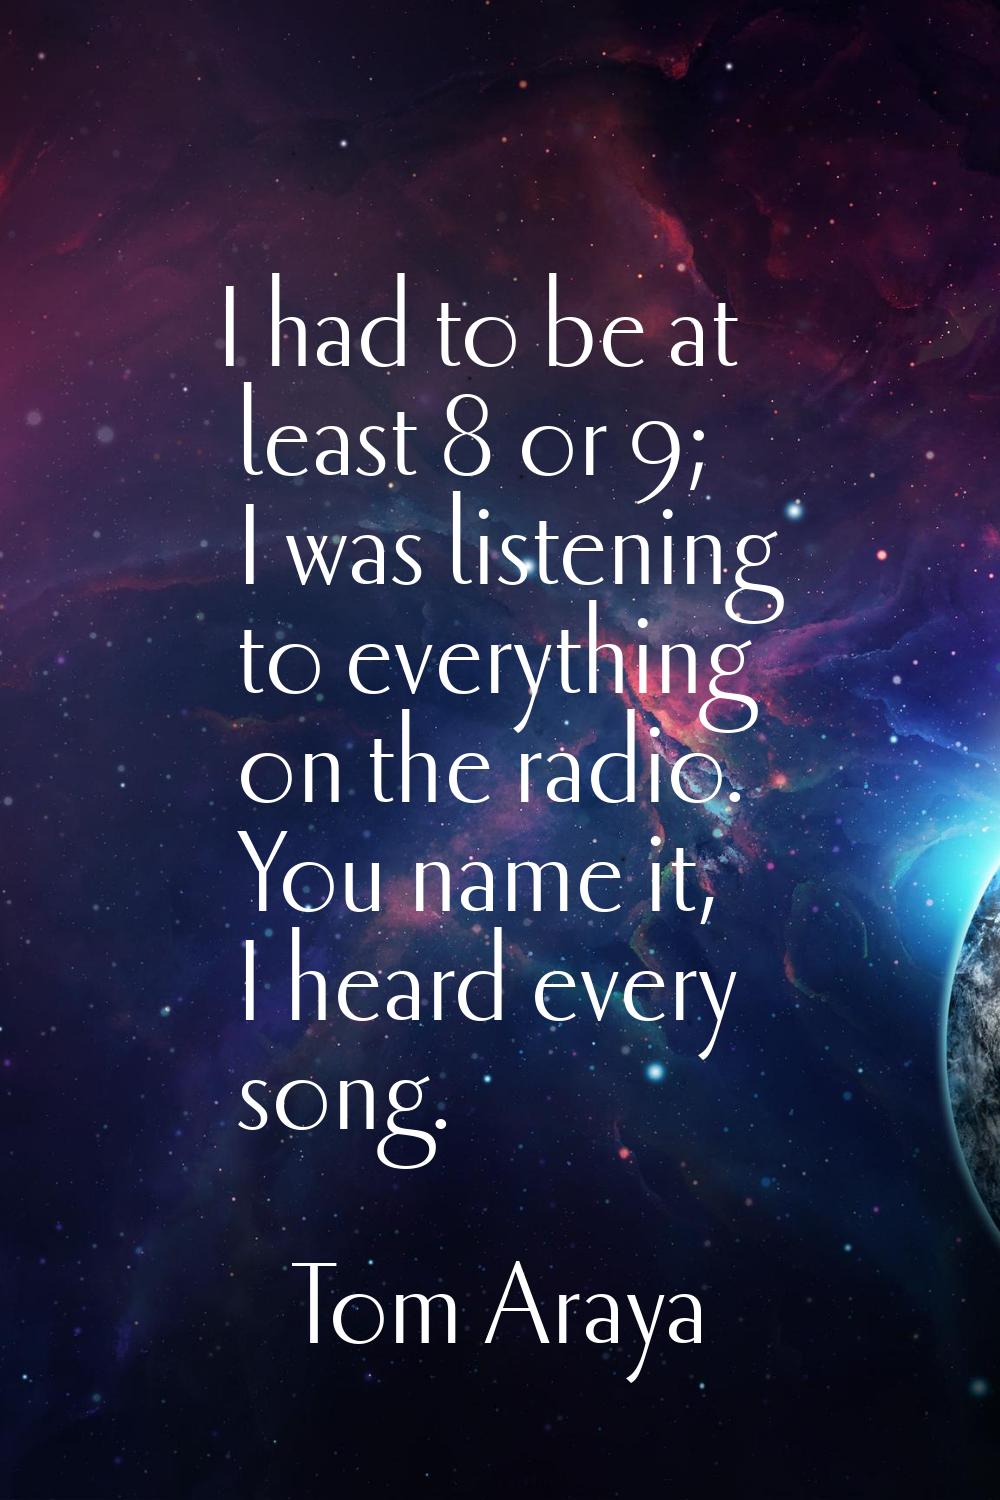 I had to be at least 8 or 9; I was listening to everything on the radio. You name it, I heard every